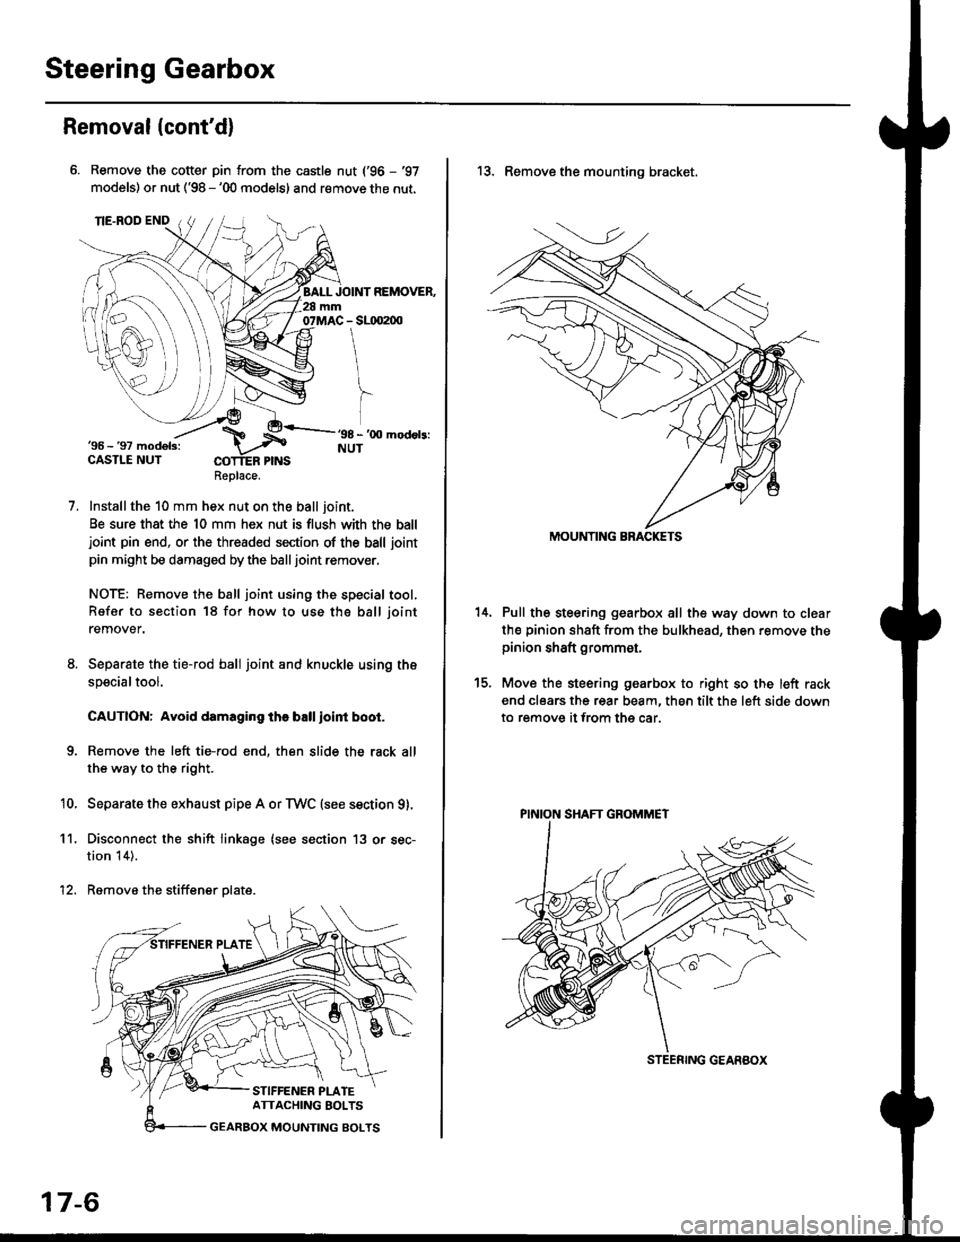 HONDA CIVIC 1998 6.G User Guide Steering Gearbox
Removal(contd)
Remove the cotter pin from the castle nut (96 - 97
models) or nut (98 - 00 models) and remove the nut.
Installthe 10 mm hex nut on the ball joint.
Be sure that the